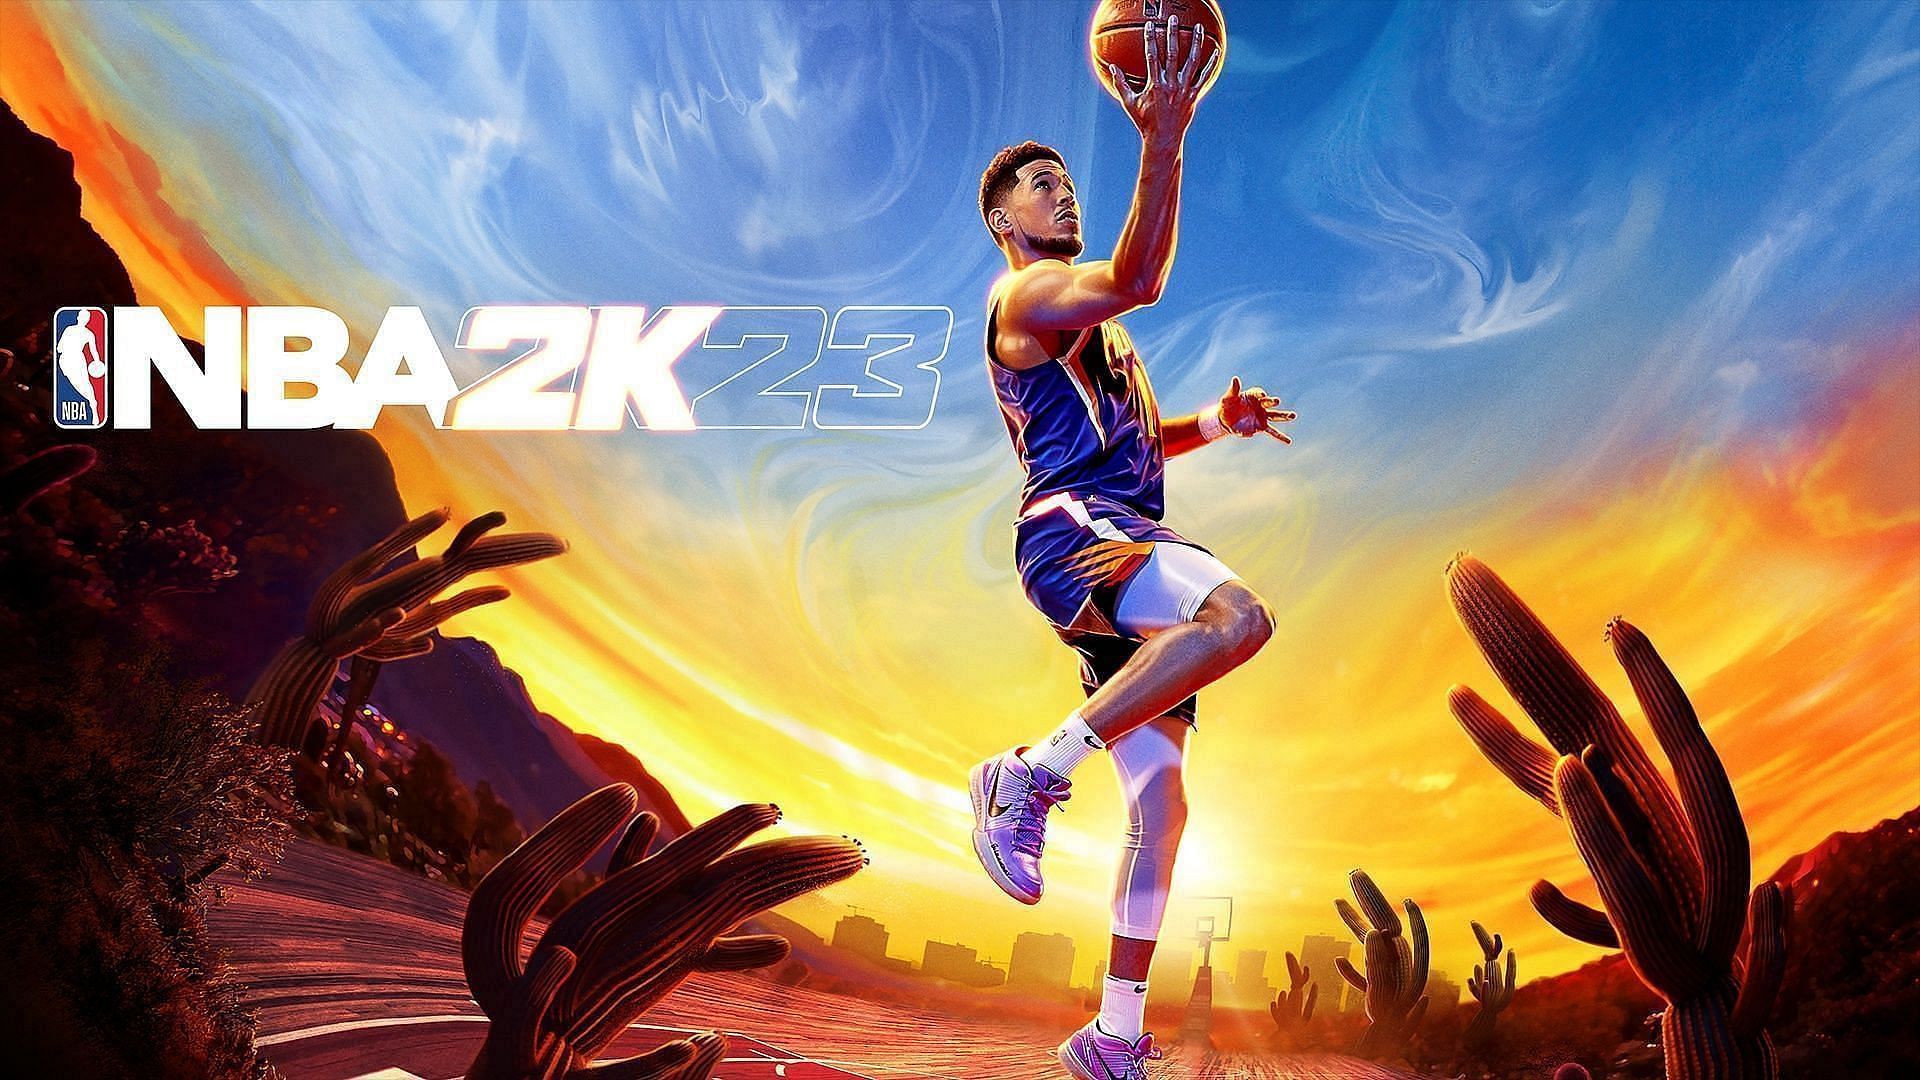 NBA 2K23 was officially released on September 9th.